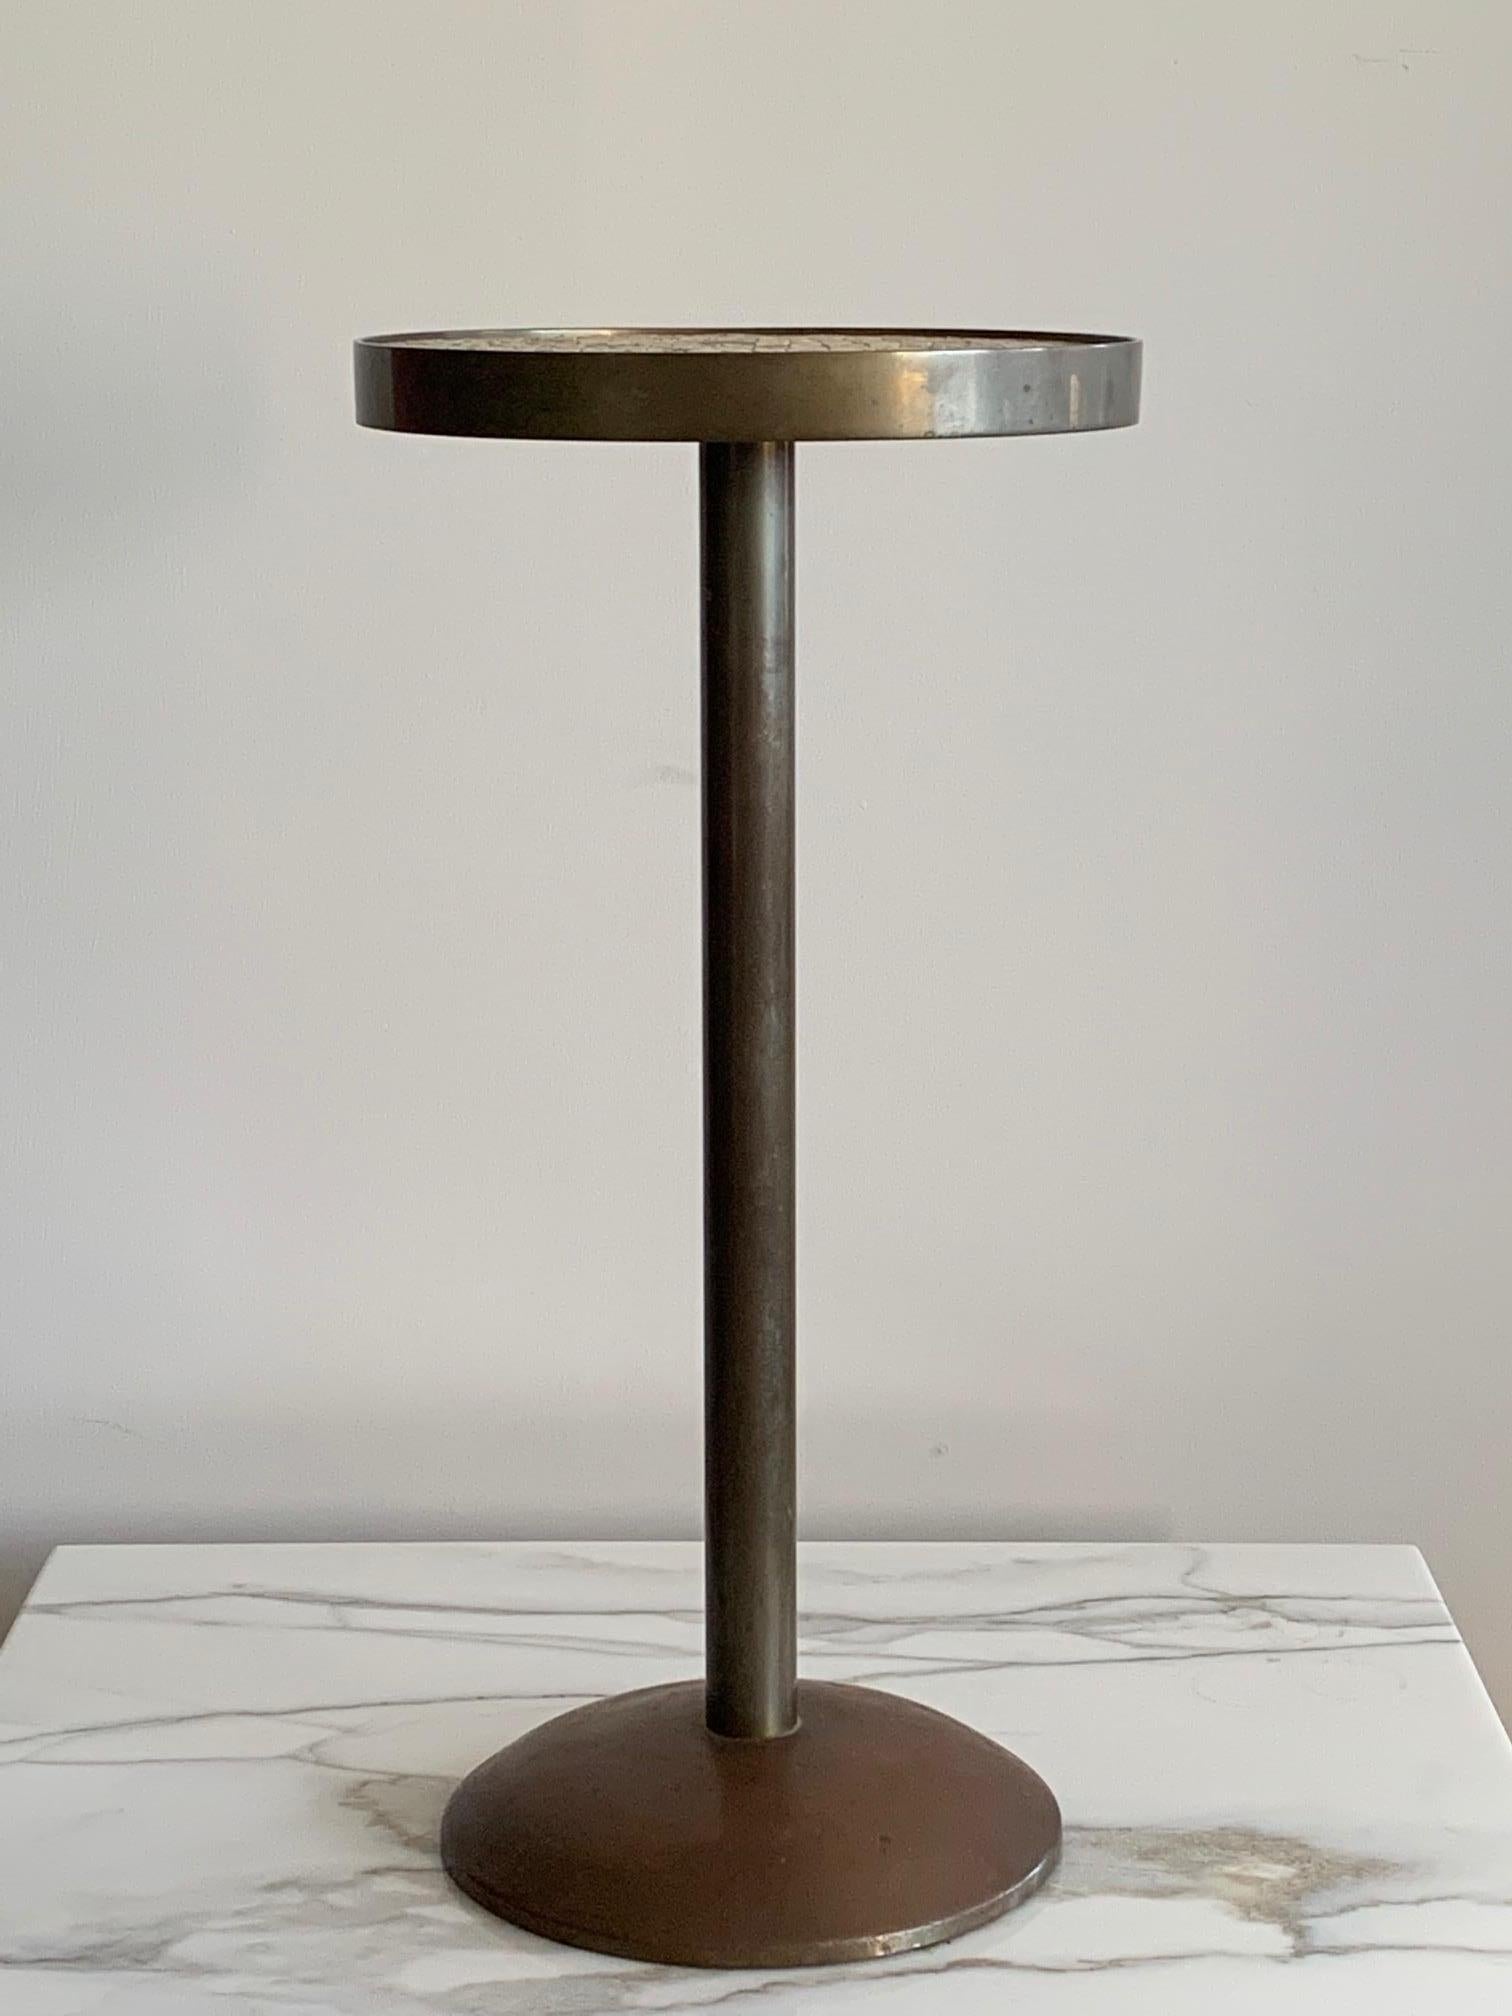 An unusual bronze table with tile top. Very heavy and well made.